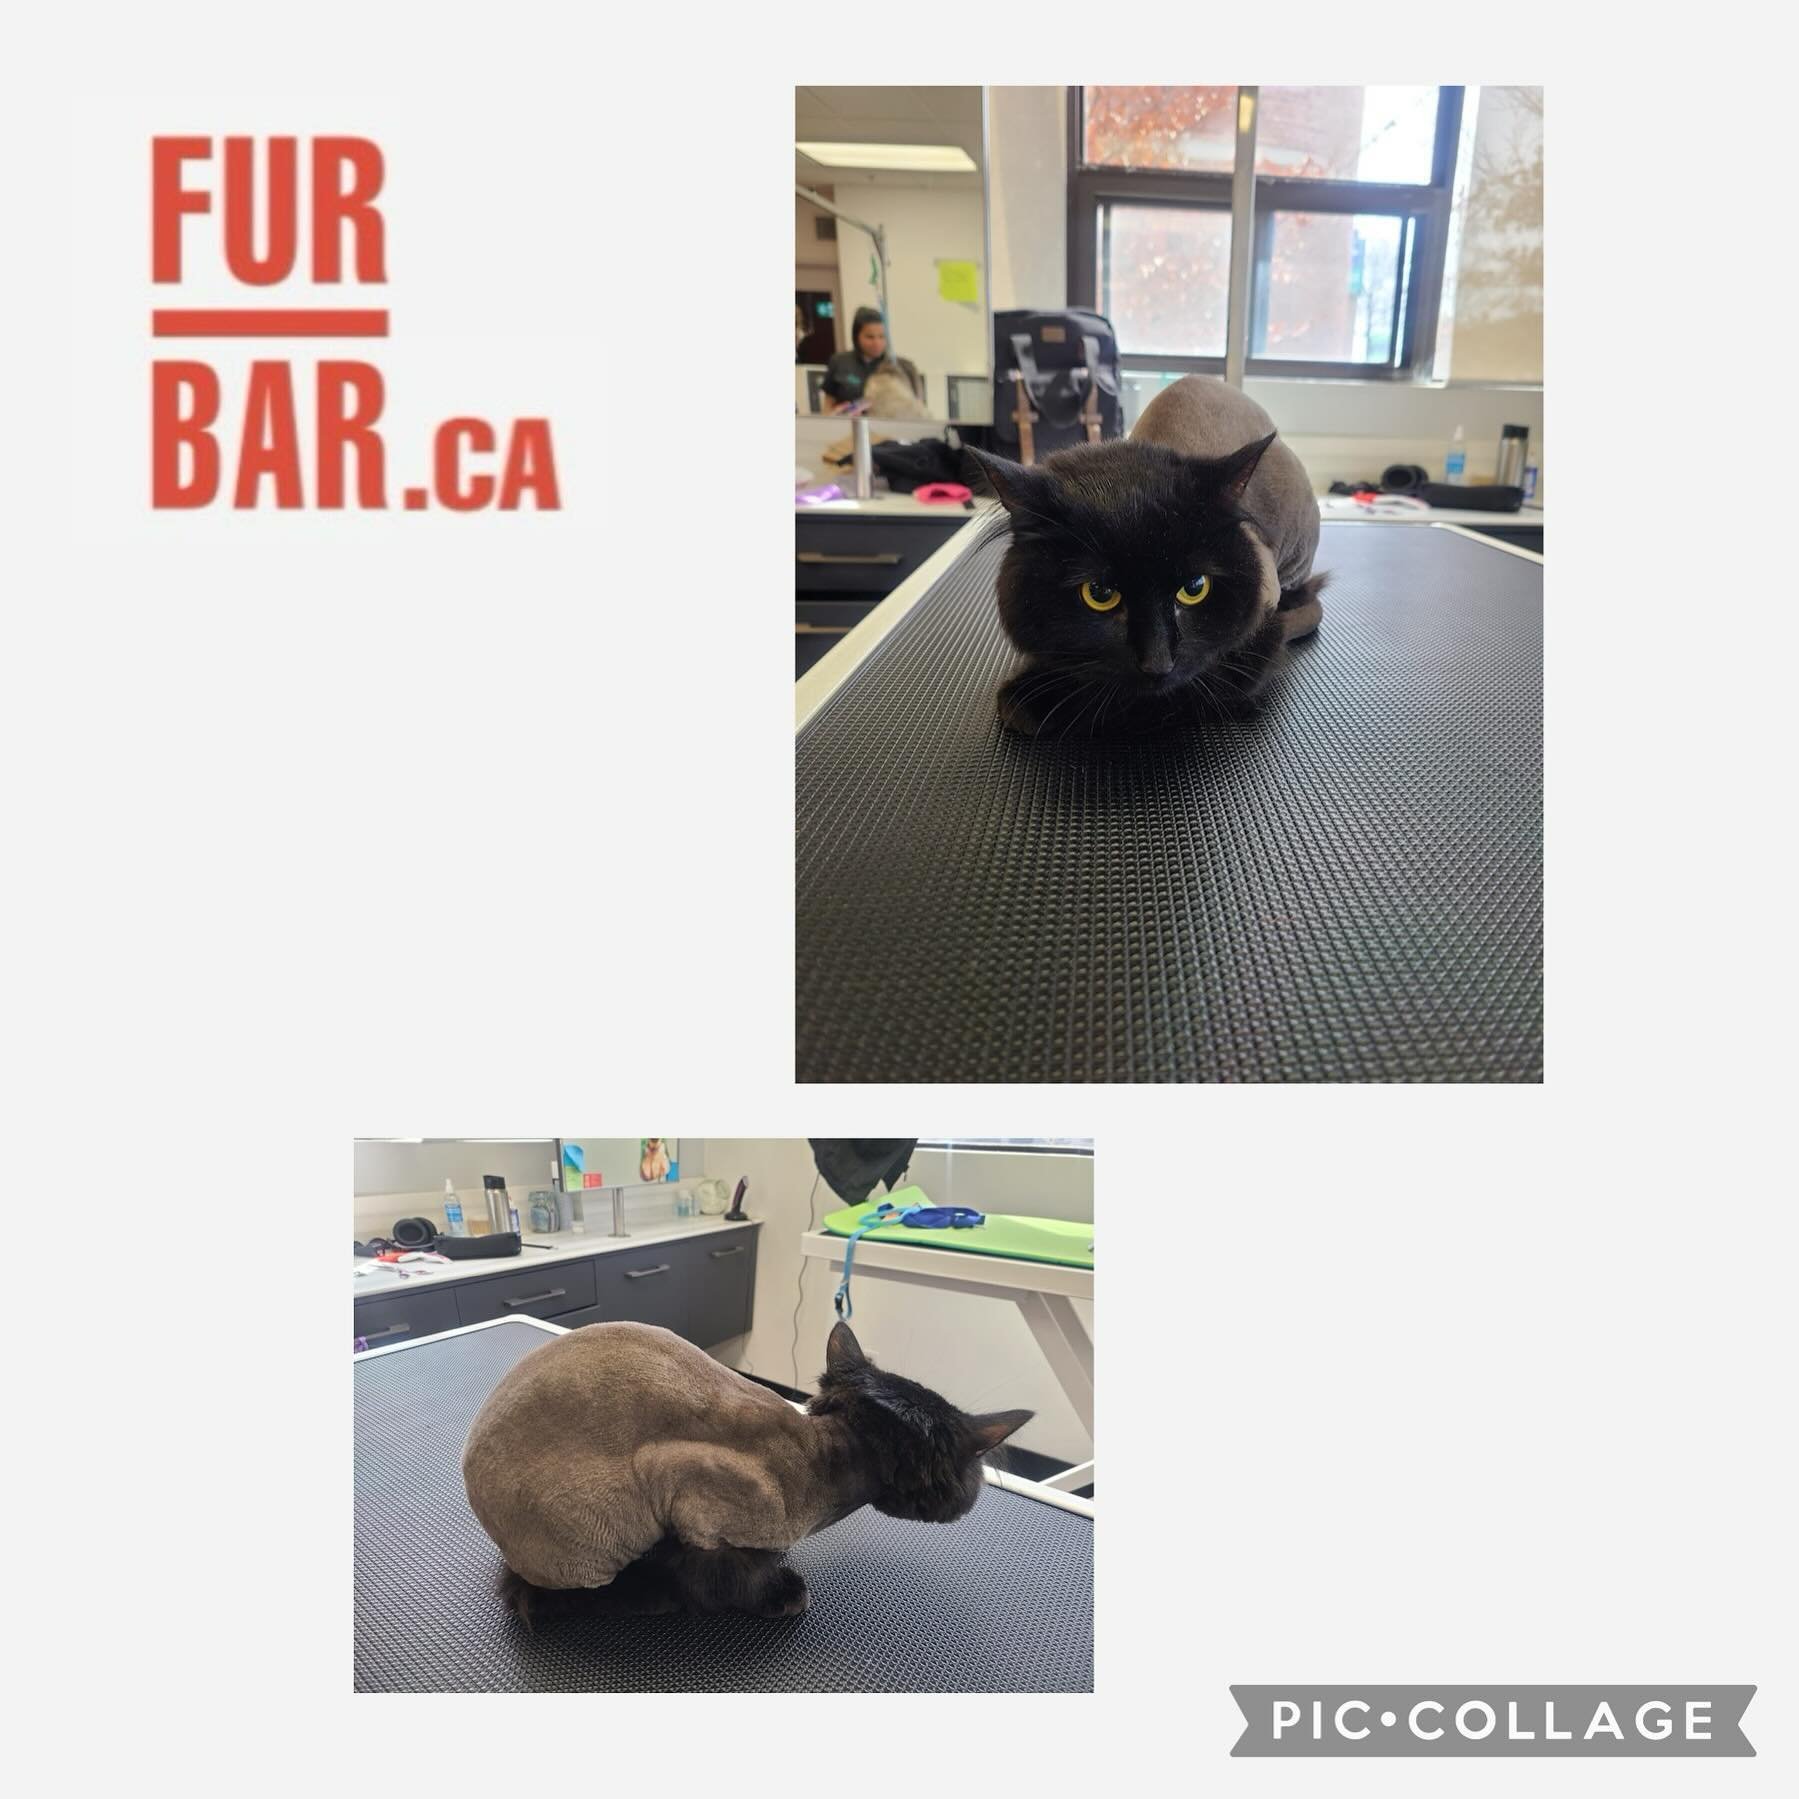 Cat day is any day from Tuesday to Friday with Katelyn and Melissa &hearts;️
Call for more information 
#cargrooming #salon #groomingsalon #furbar #furbargrooming #pet #catlover #toronto #northyork